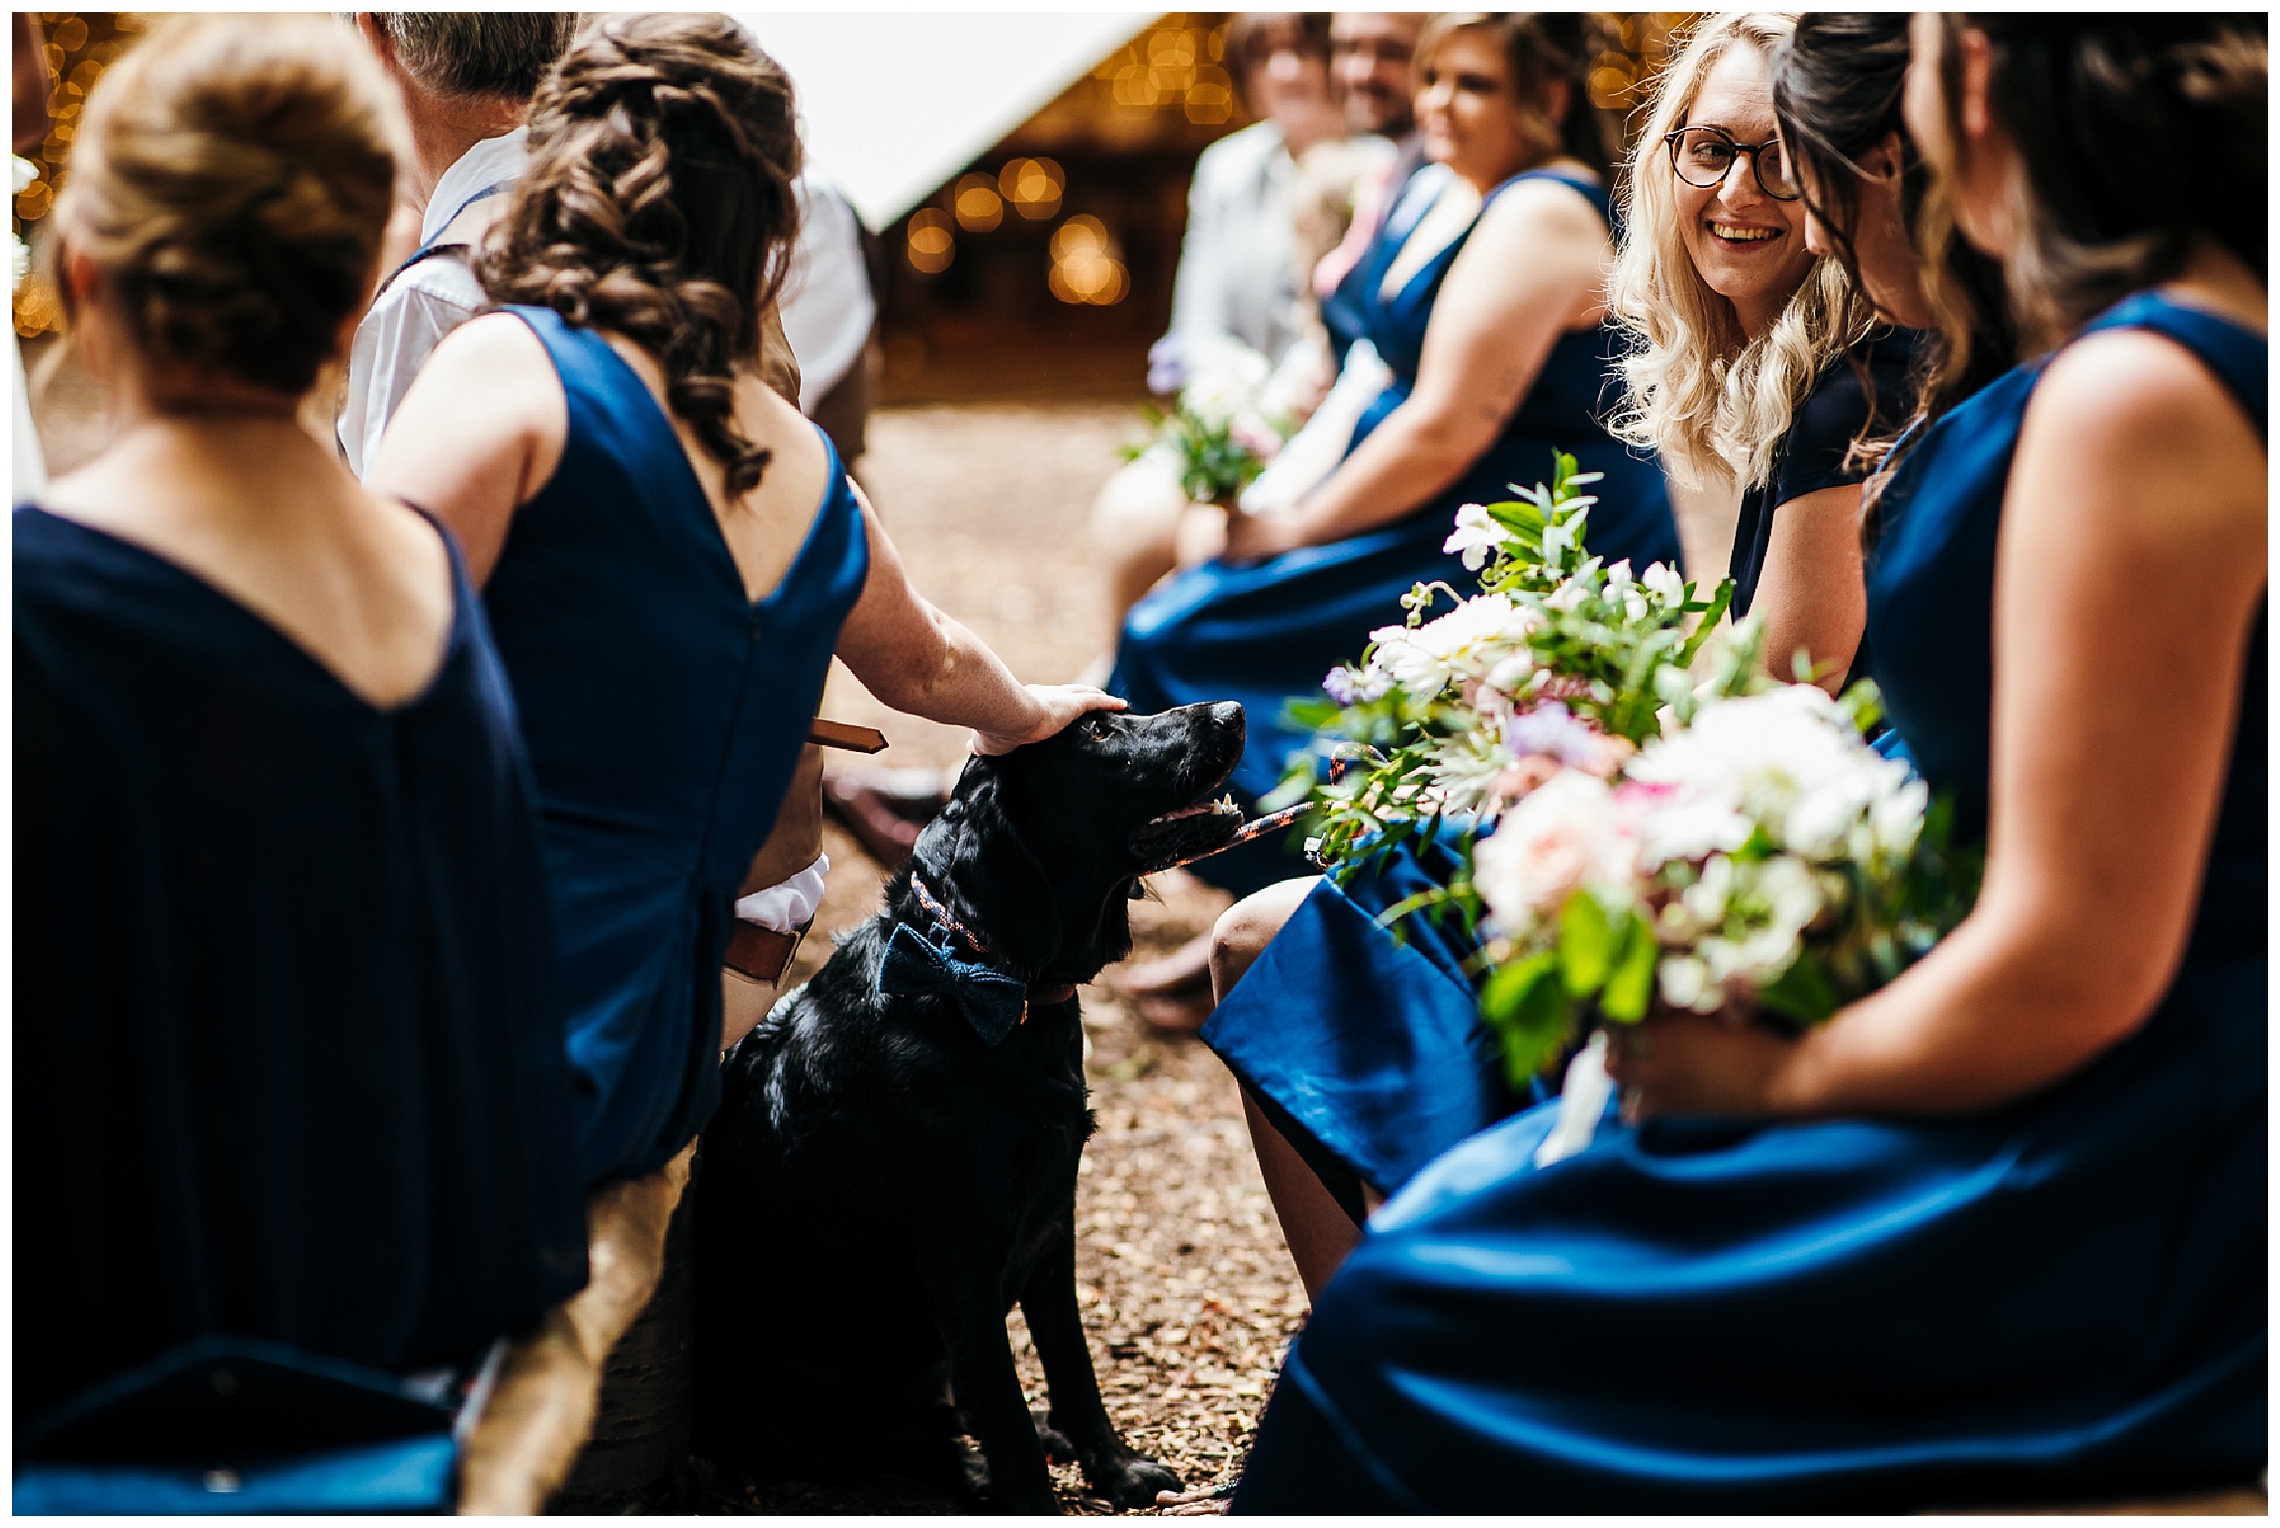 black labrador dog being patted by bridesmaids at outdoor wedding lilas wood